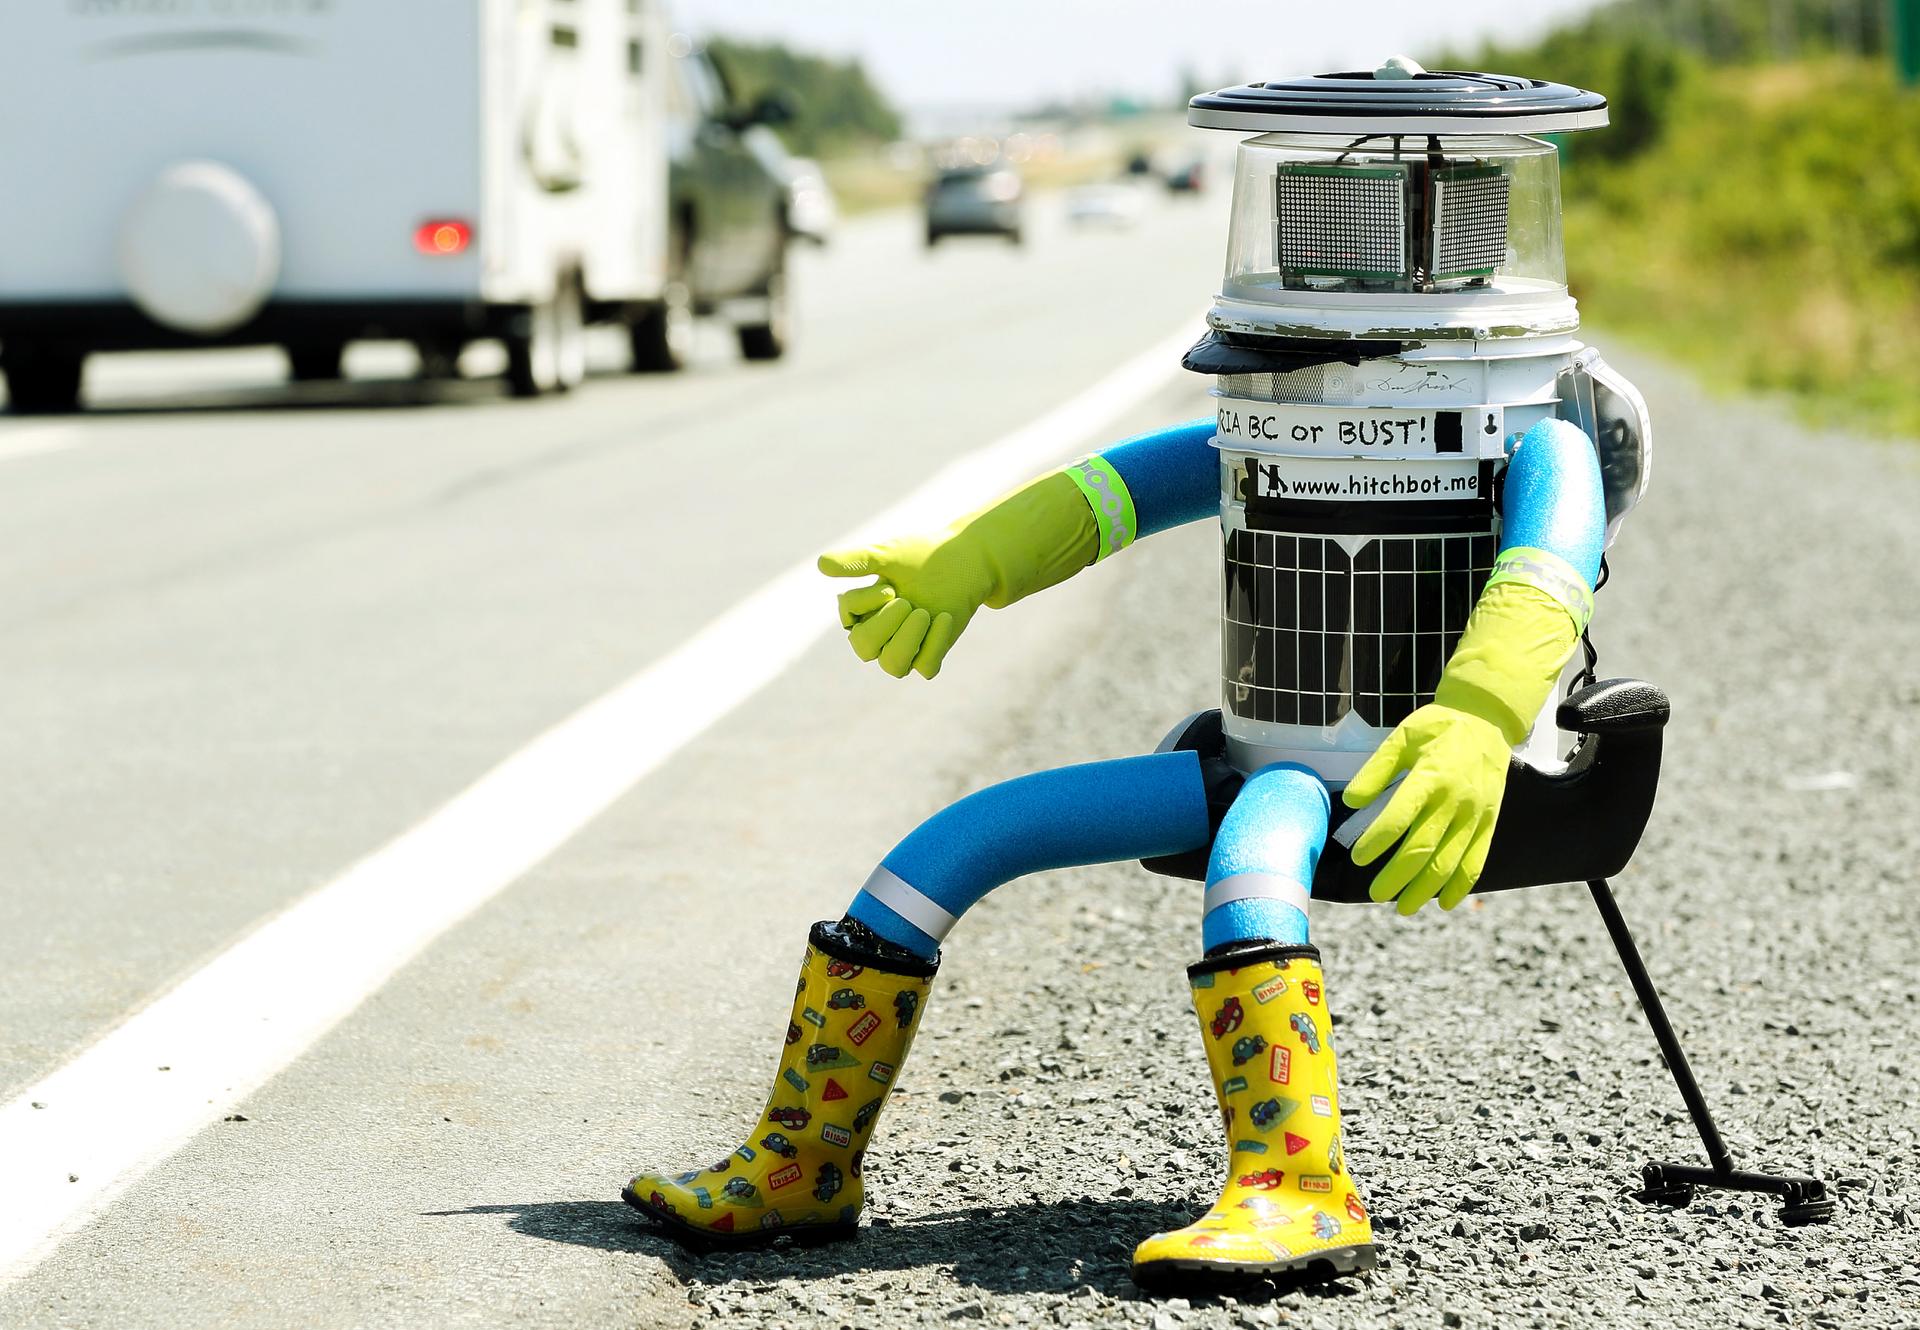 hitchBOT, the hitchhiking robot, was destroyed in Philadelphia.